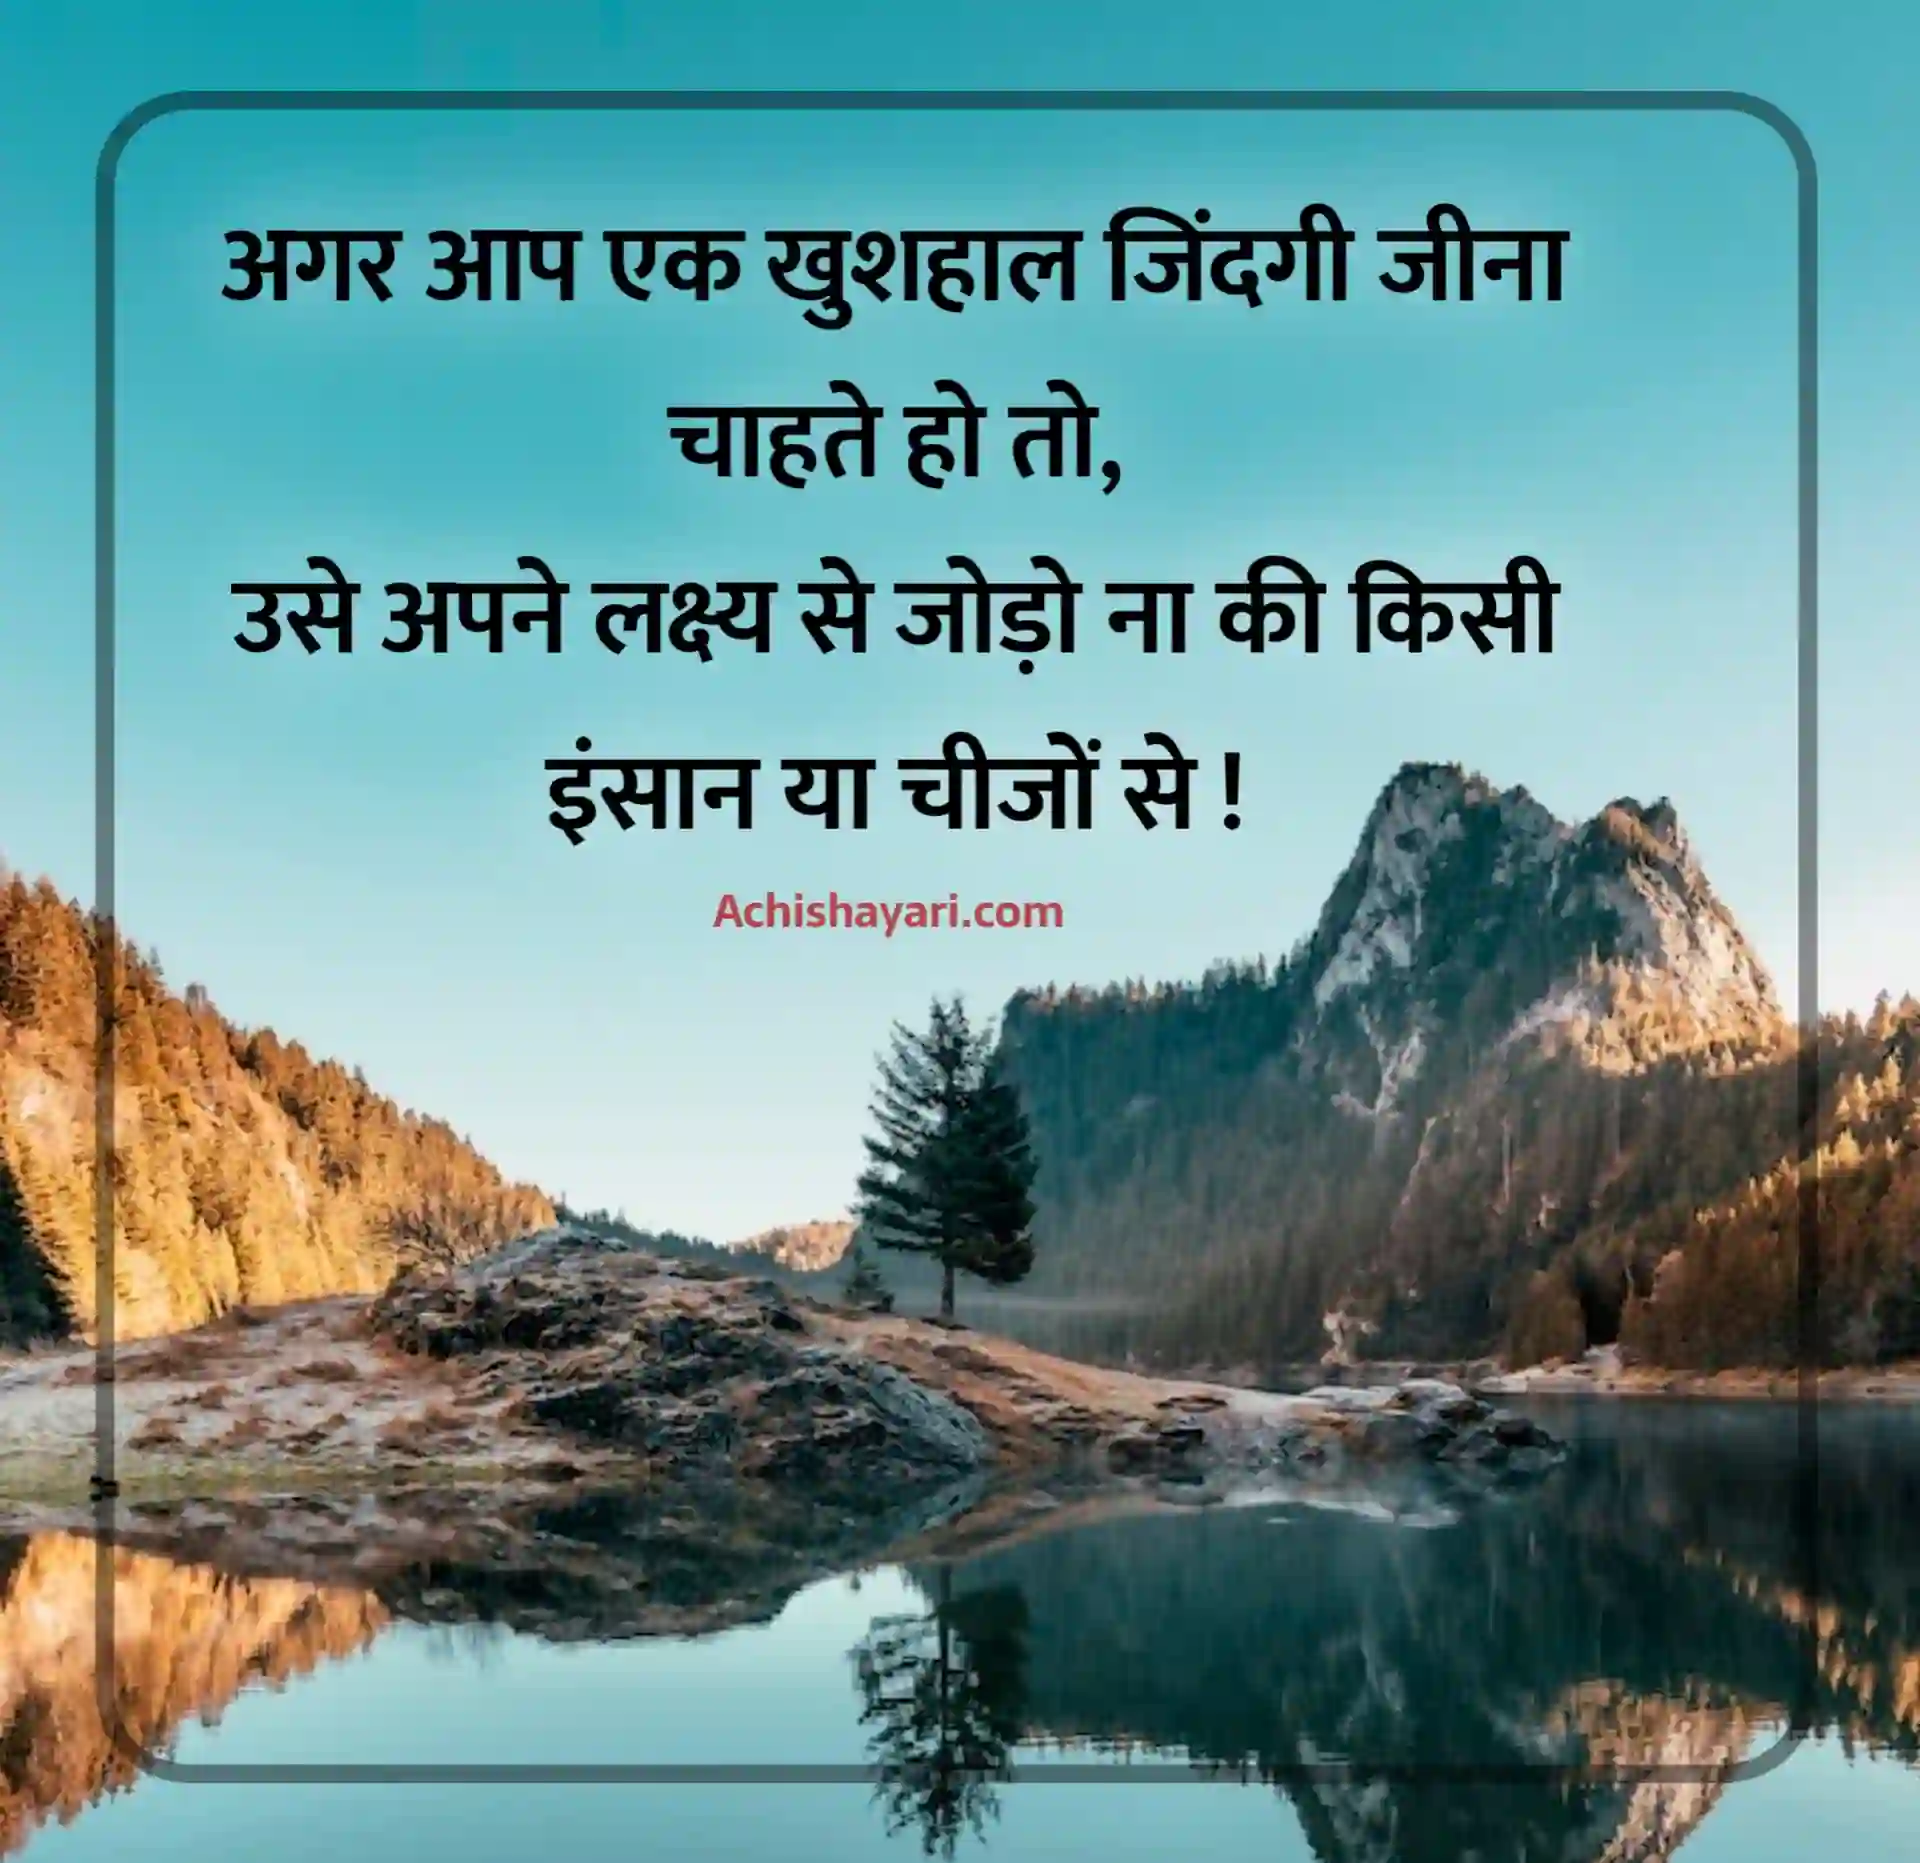 True Lines in Hindi About Life